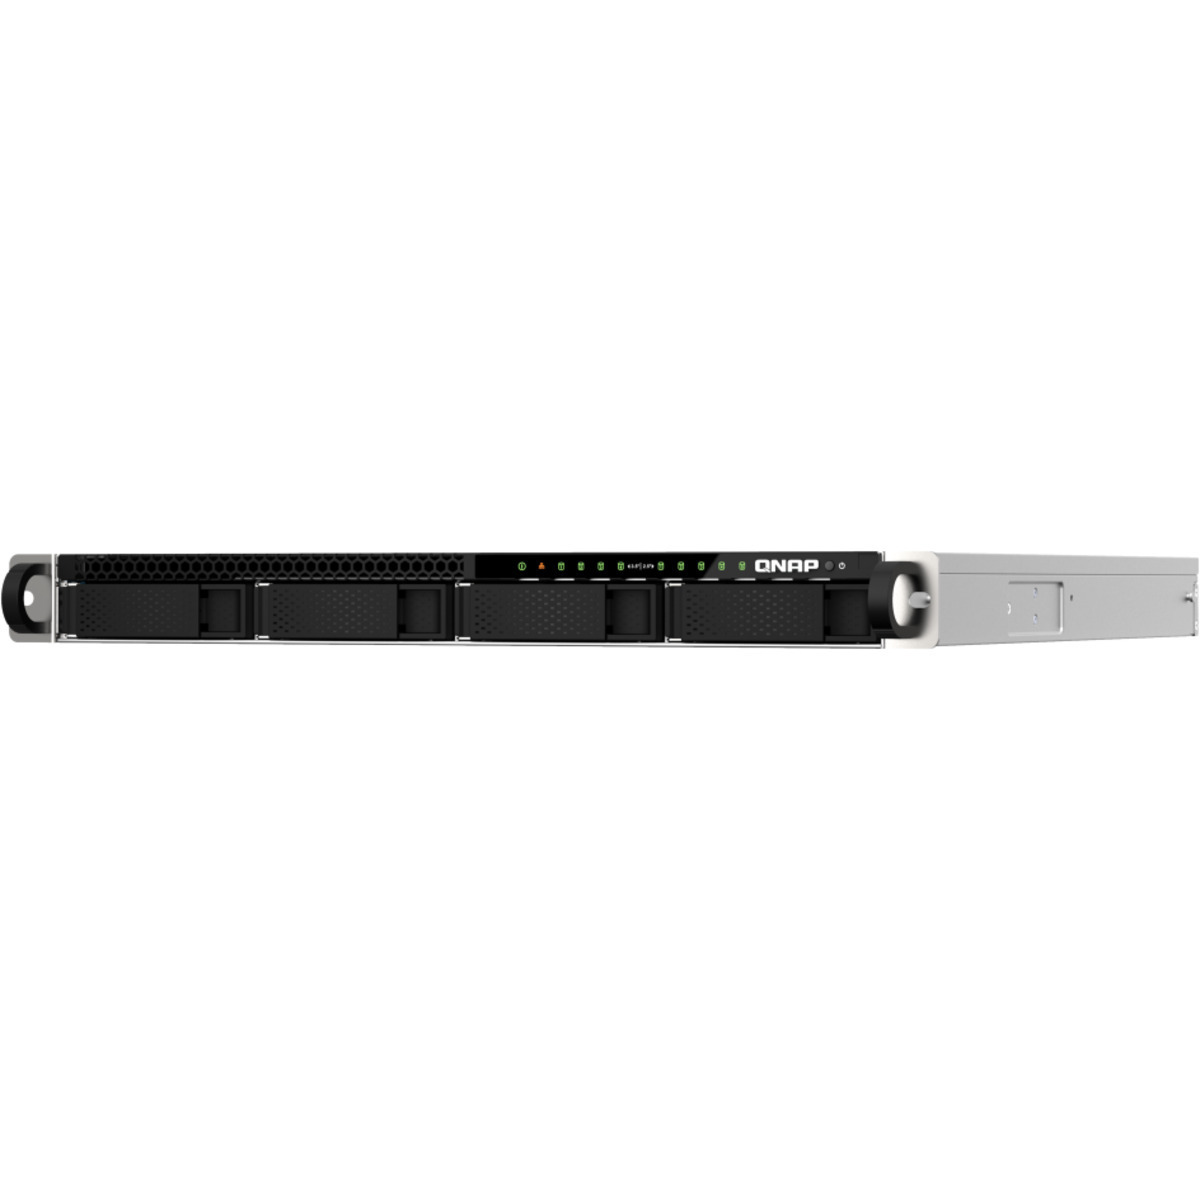 buy QNAP TS-h987XU-RP QuTS hero Edition 16tb RackMount NAS - Network Attached Storage Device 4x4000gb Seagate BarraCuda ST4000DM004 3.5 7200rpm SATA 6Gb/s HDD CONSUMER Class Drives Installed - Burn-In Tested - nas headquarters buy network attached storage server device das new raid-5 free shipping usa spring sale TS-h987XU-RP QuTS hero Edition